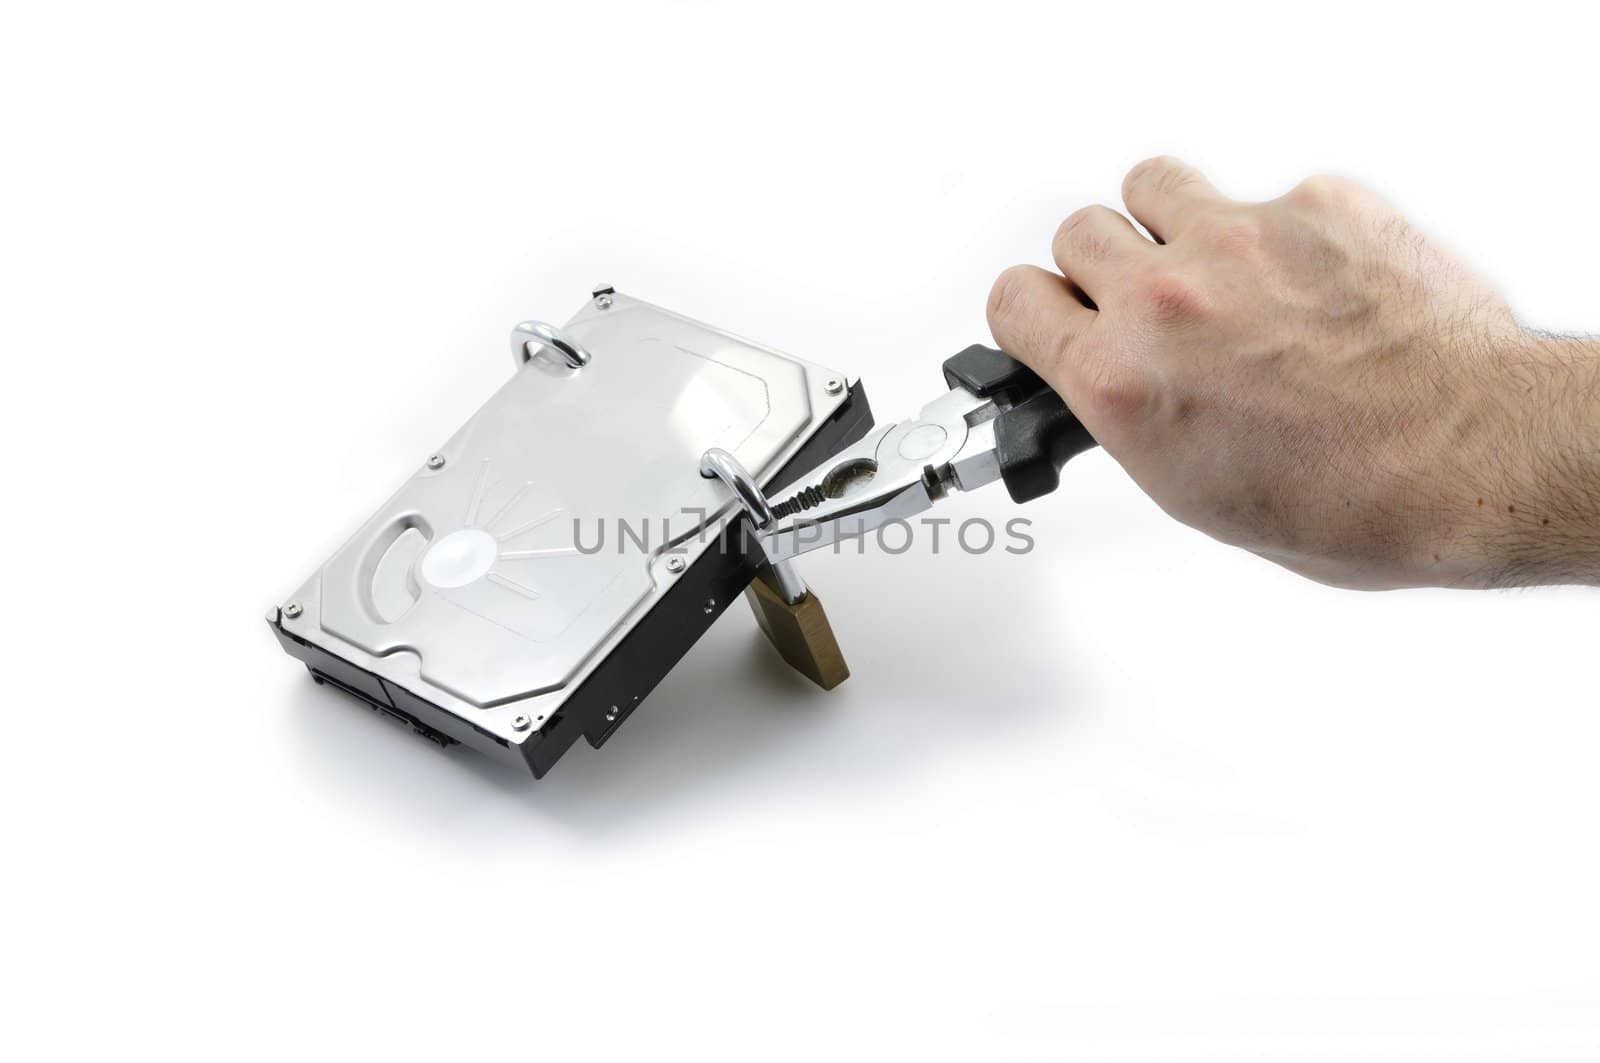 Hard disk protected under attack by one hand with pliers on a white background